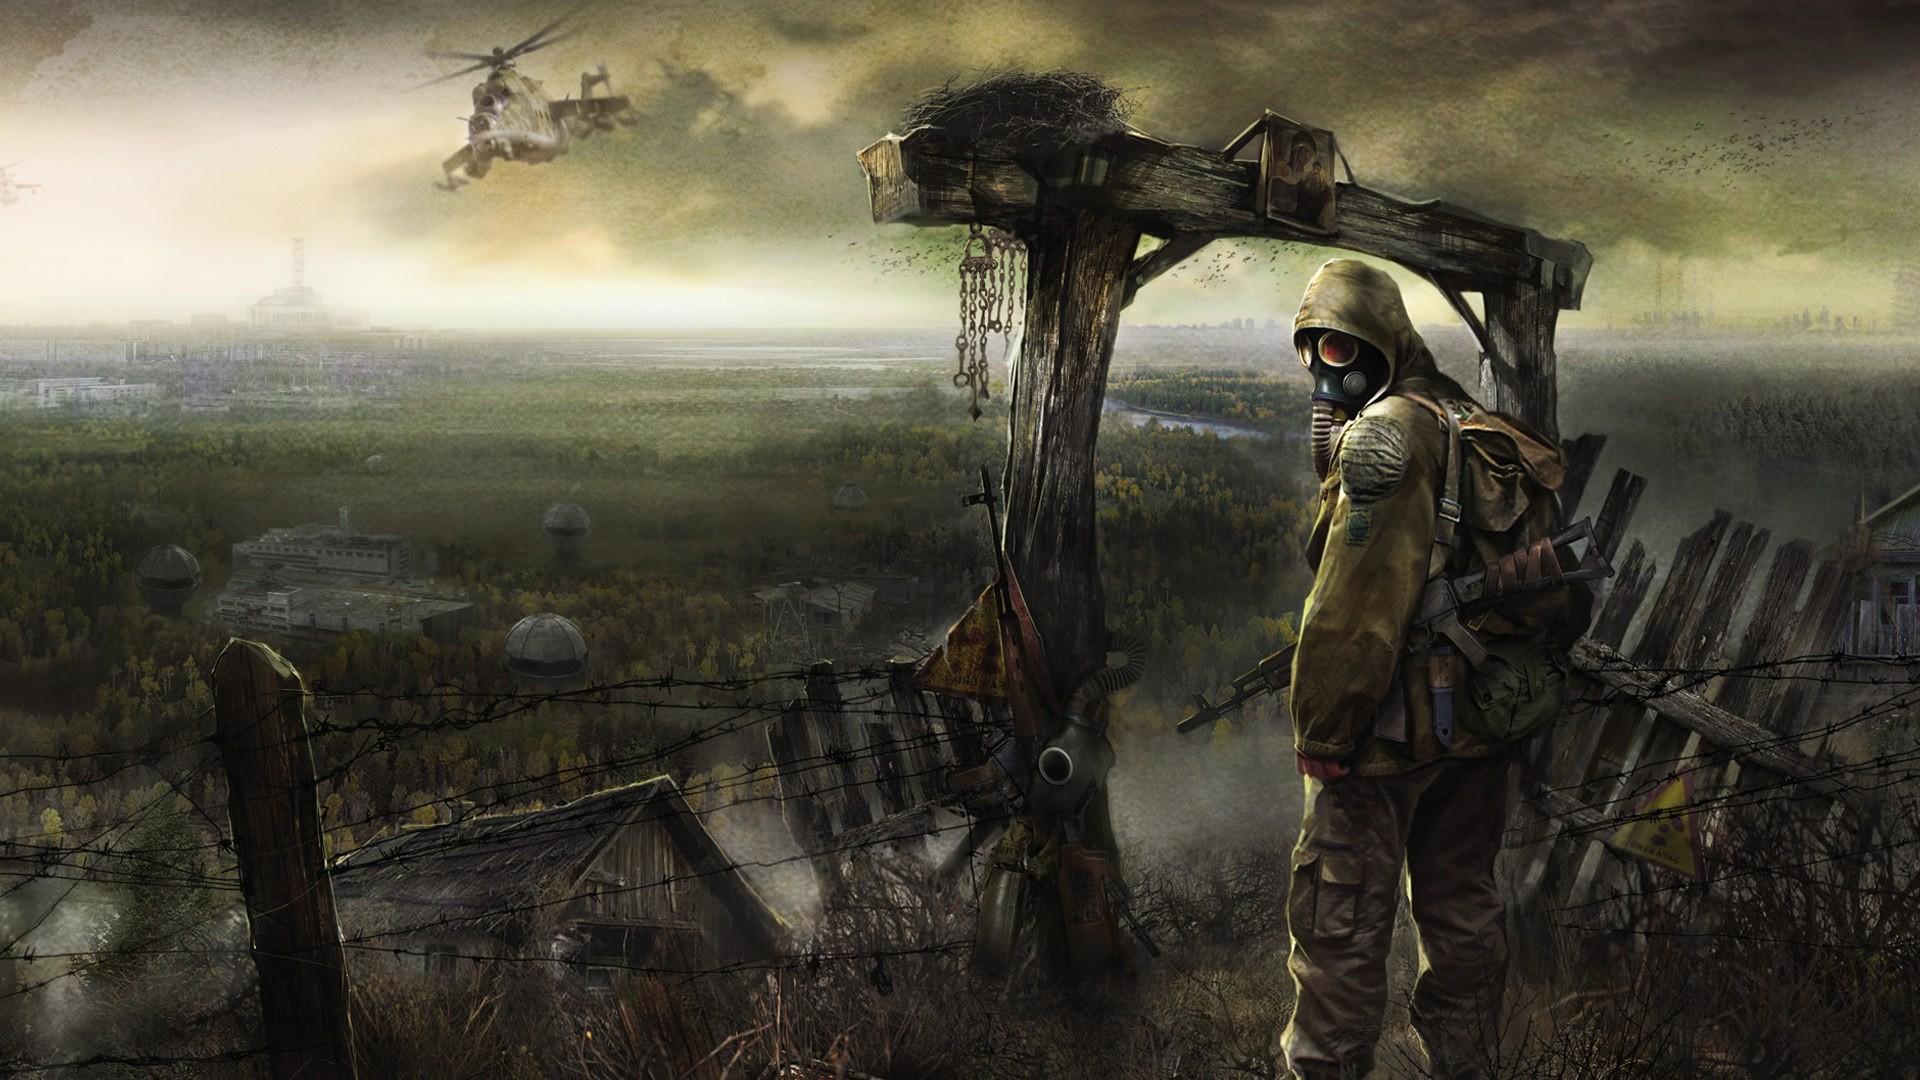 S.T.A.L.K.E.R.: Shadow of Chernobyl HD Wallpaper and Background